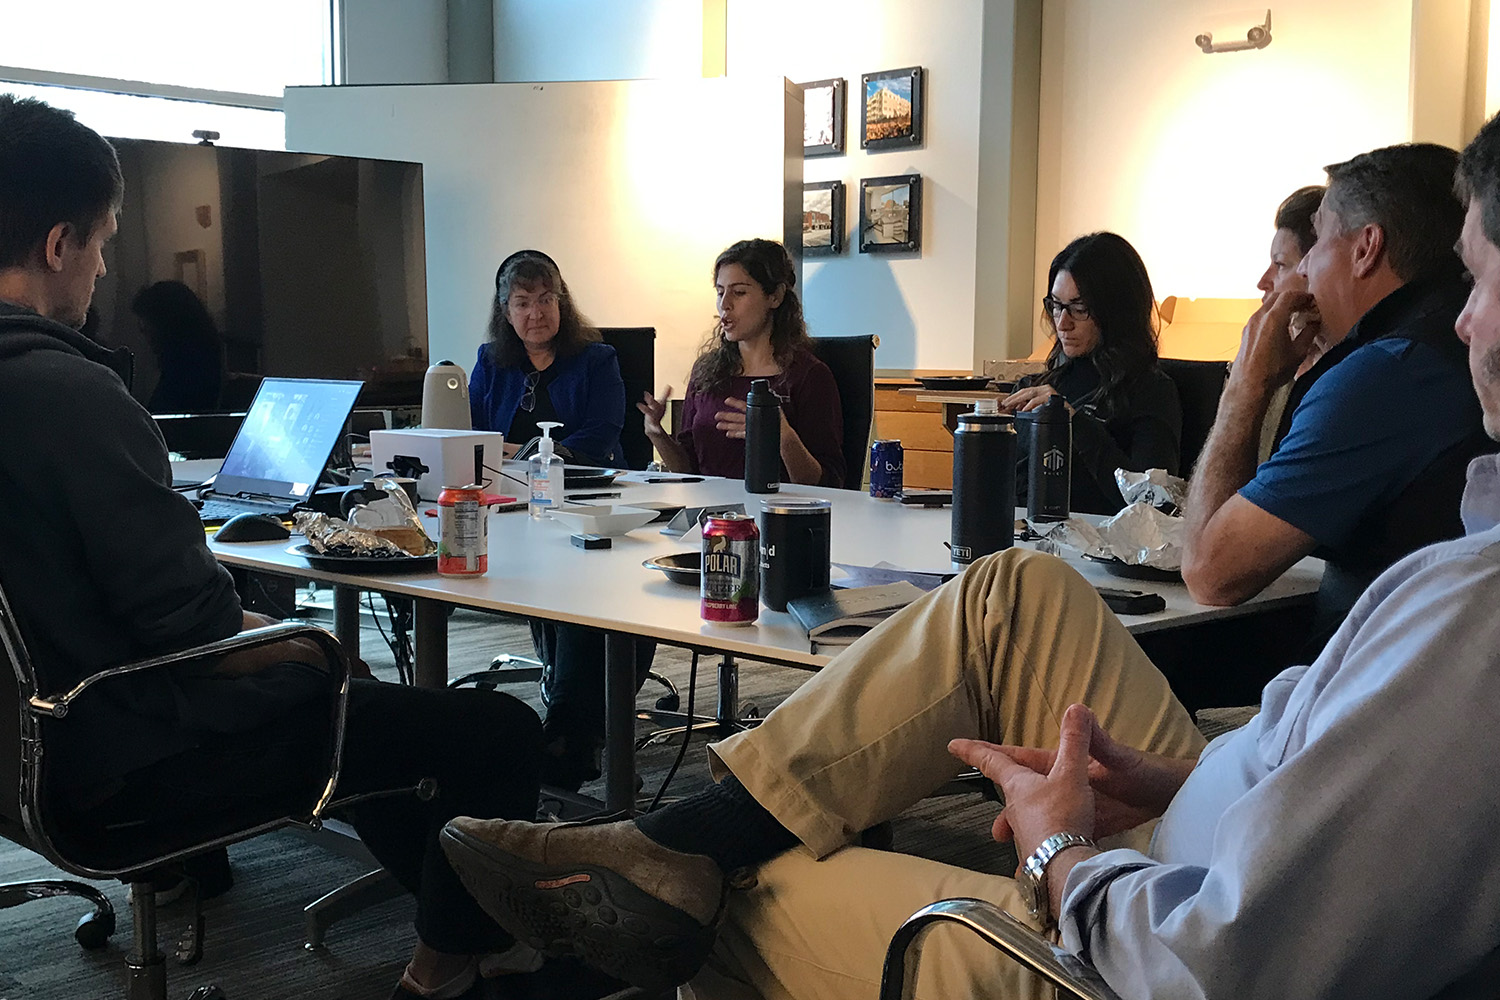 Zeina Habib leads a Lunch and Learn on biases